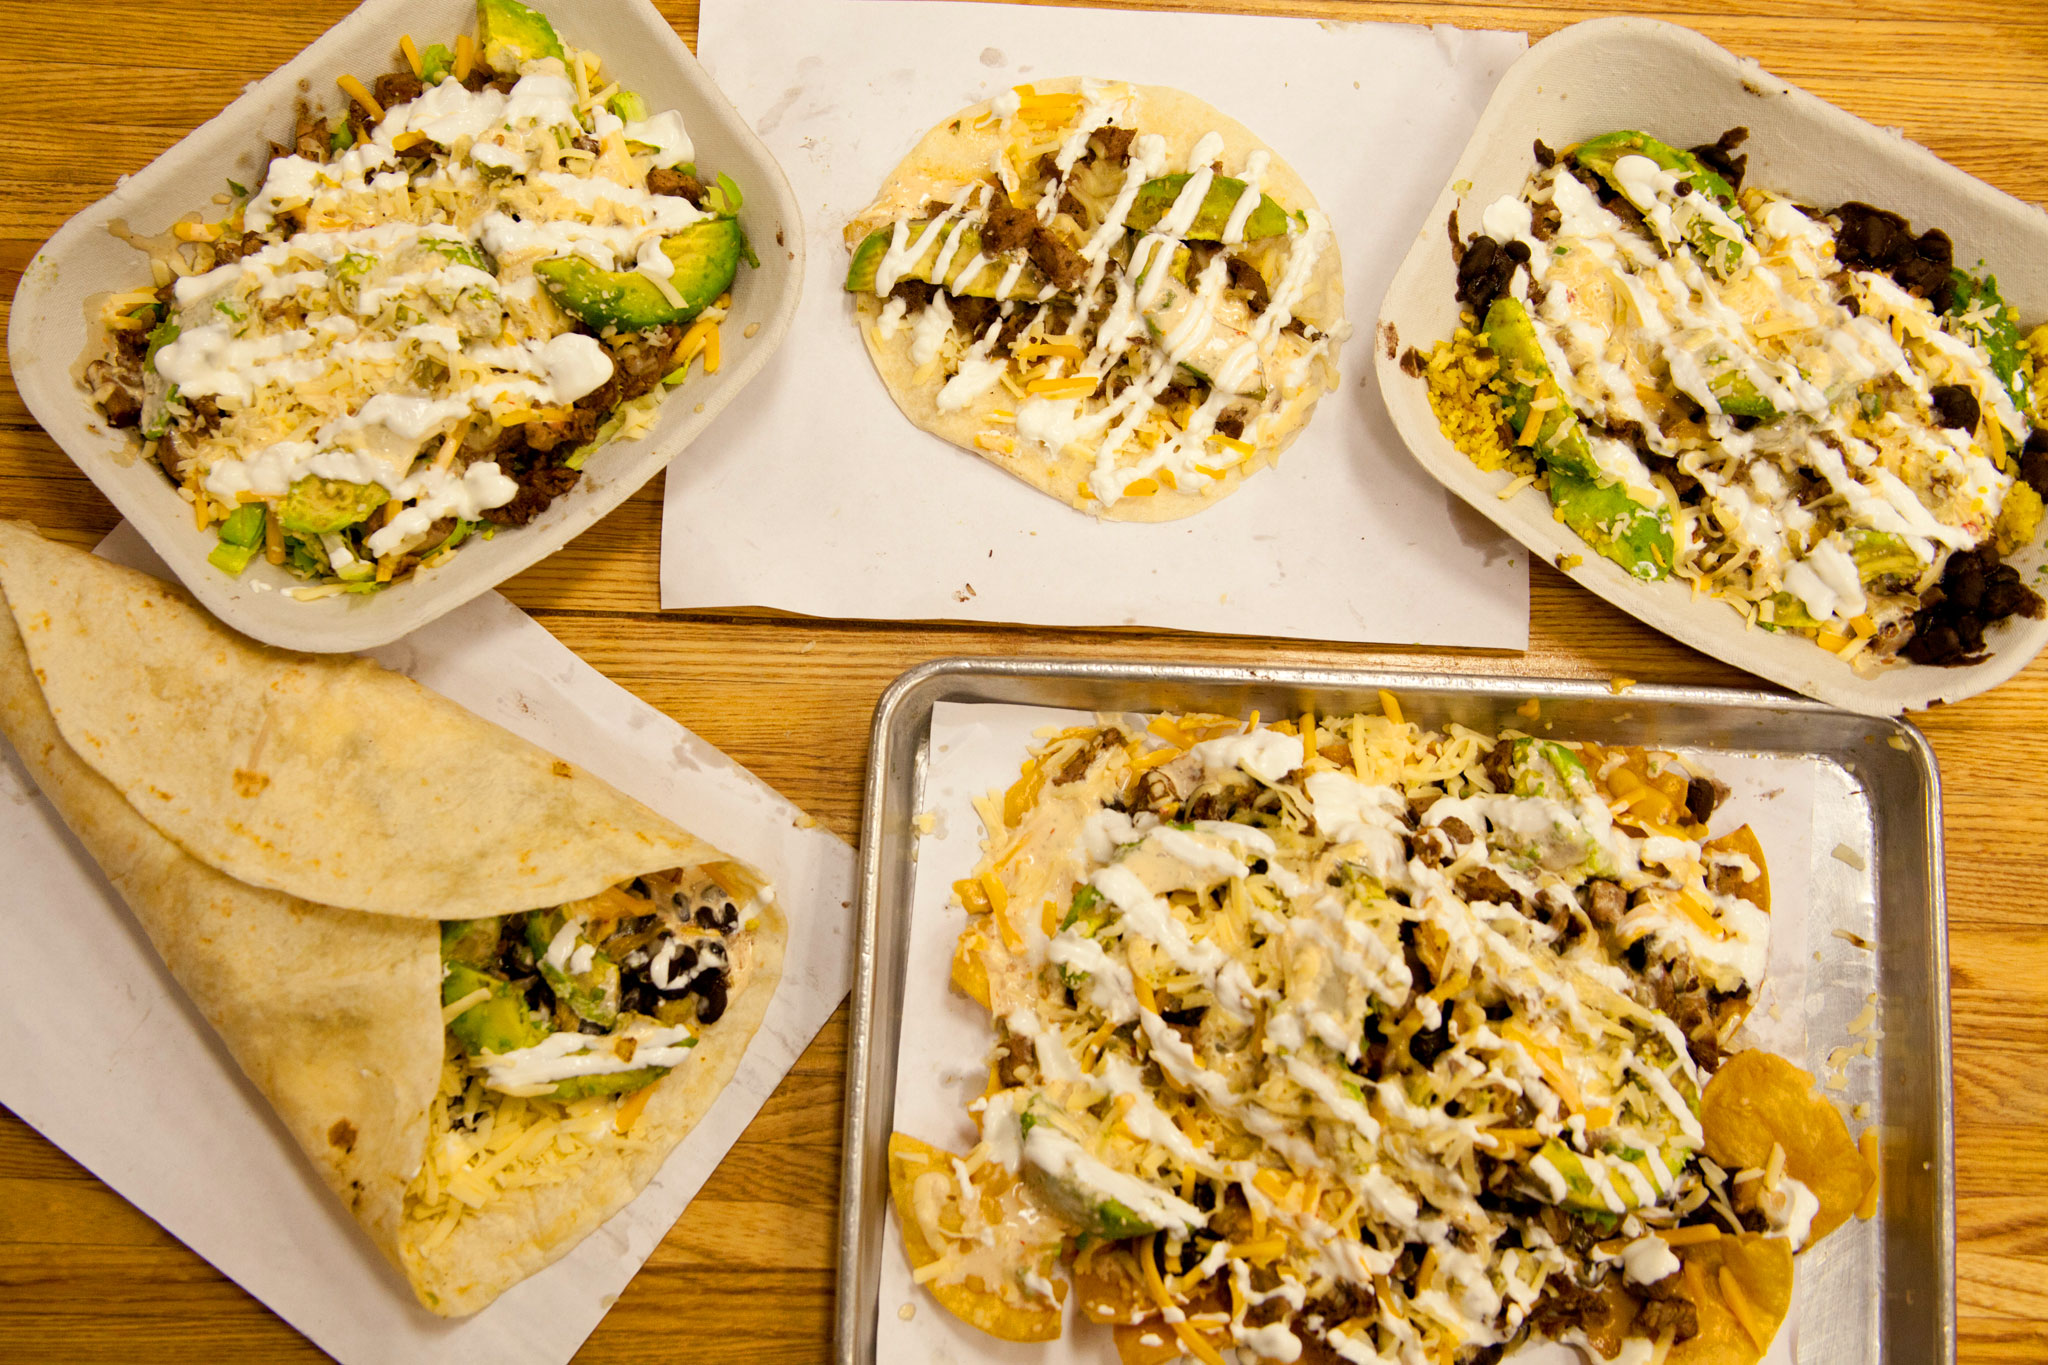 Austinite 5 Ways: The Austinite is the most popular menu item. This photo underscores the 5 ways you have any of our items - as a taco, burrito, rice bowl, salad or nachos. Carne Asada with jack & cheddar, caramelized onions, avocado, sour cream, chihuahua cheese, and chipotle ranch.